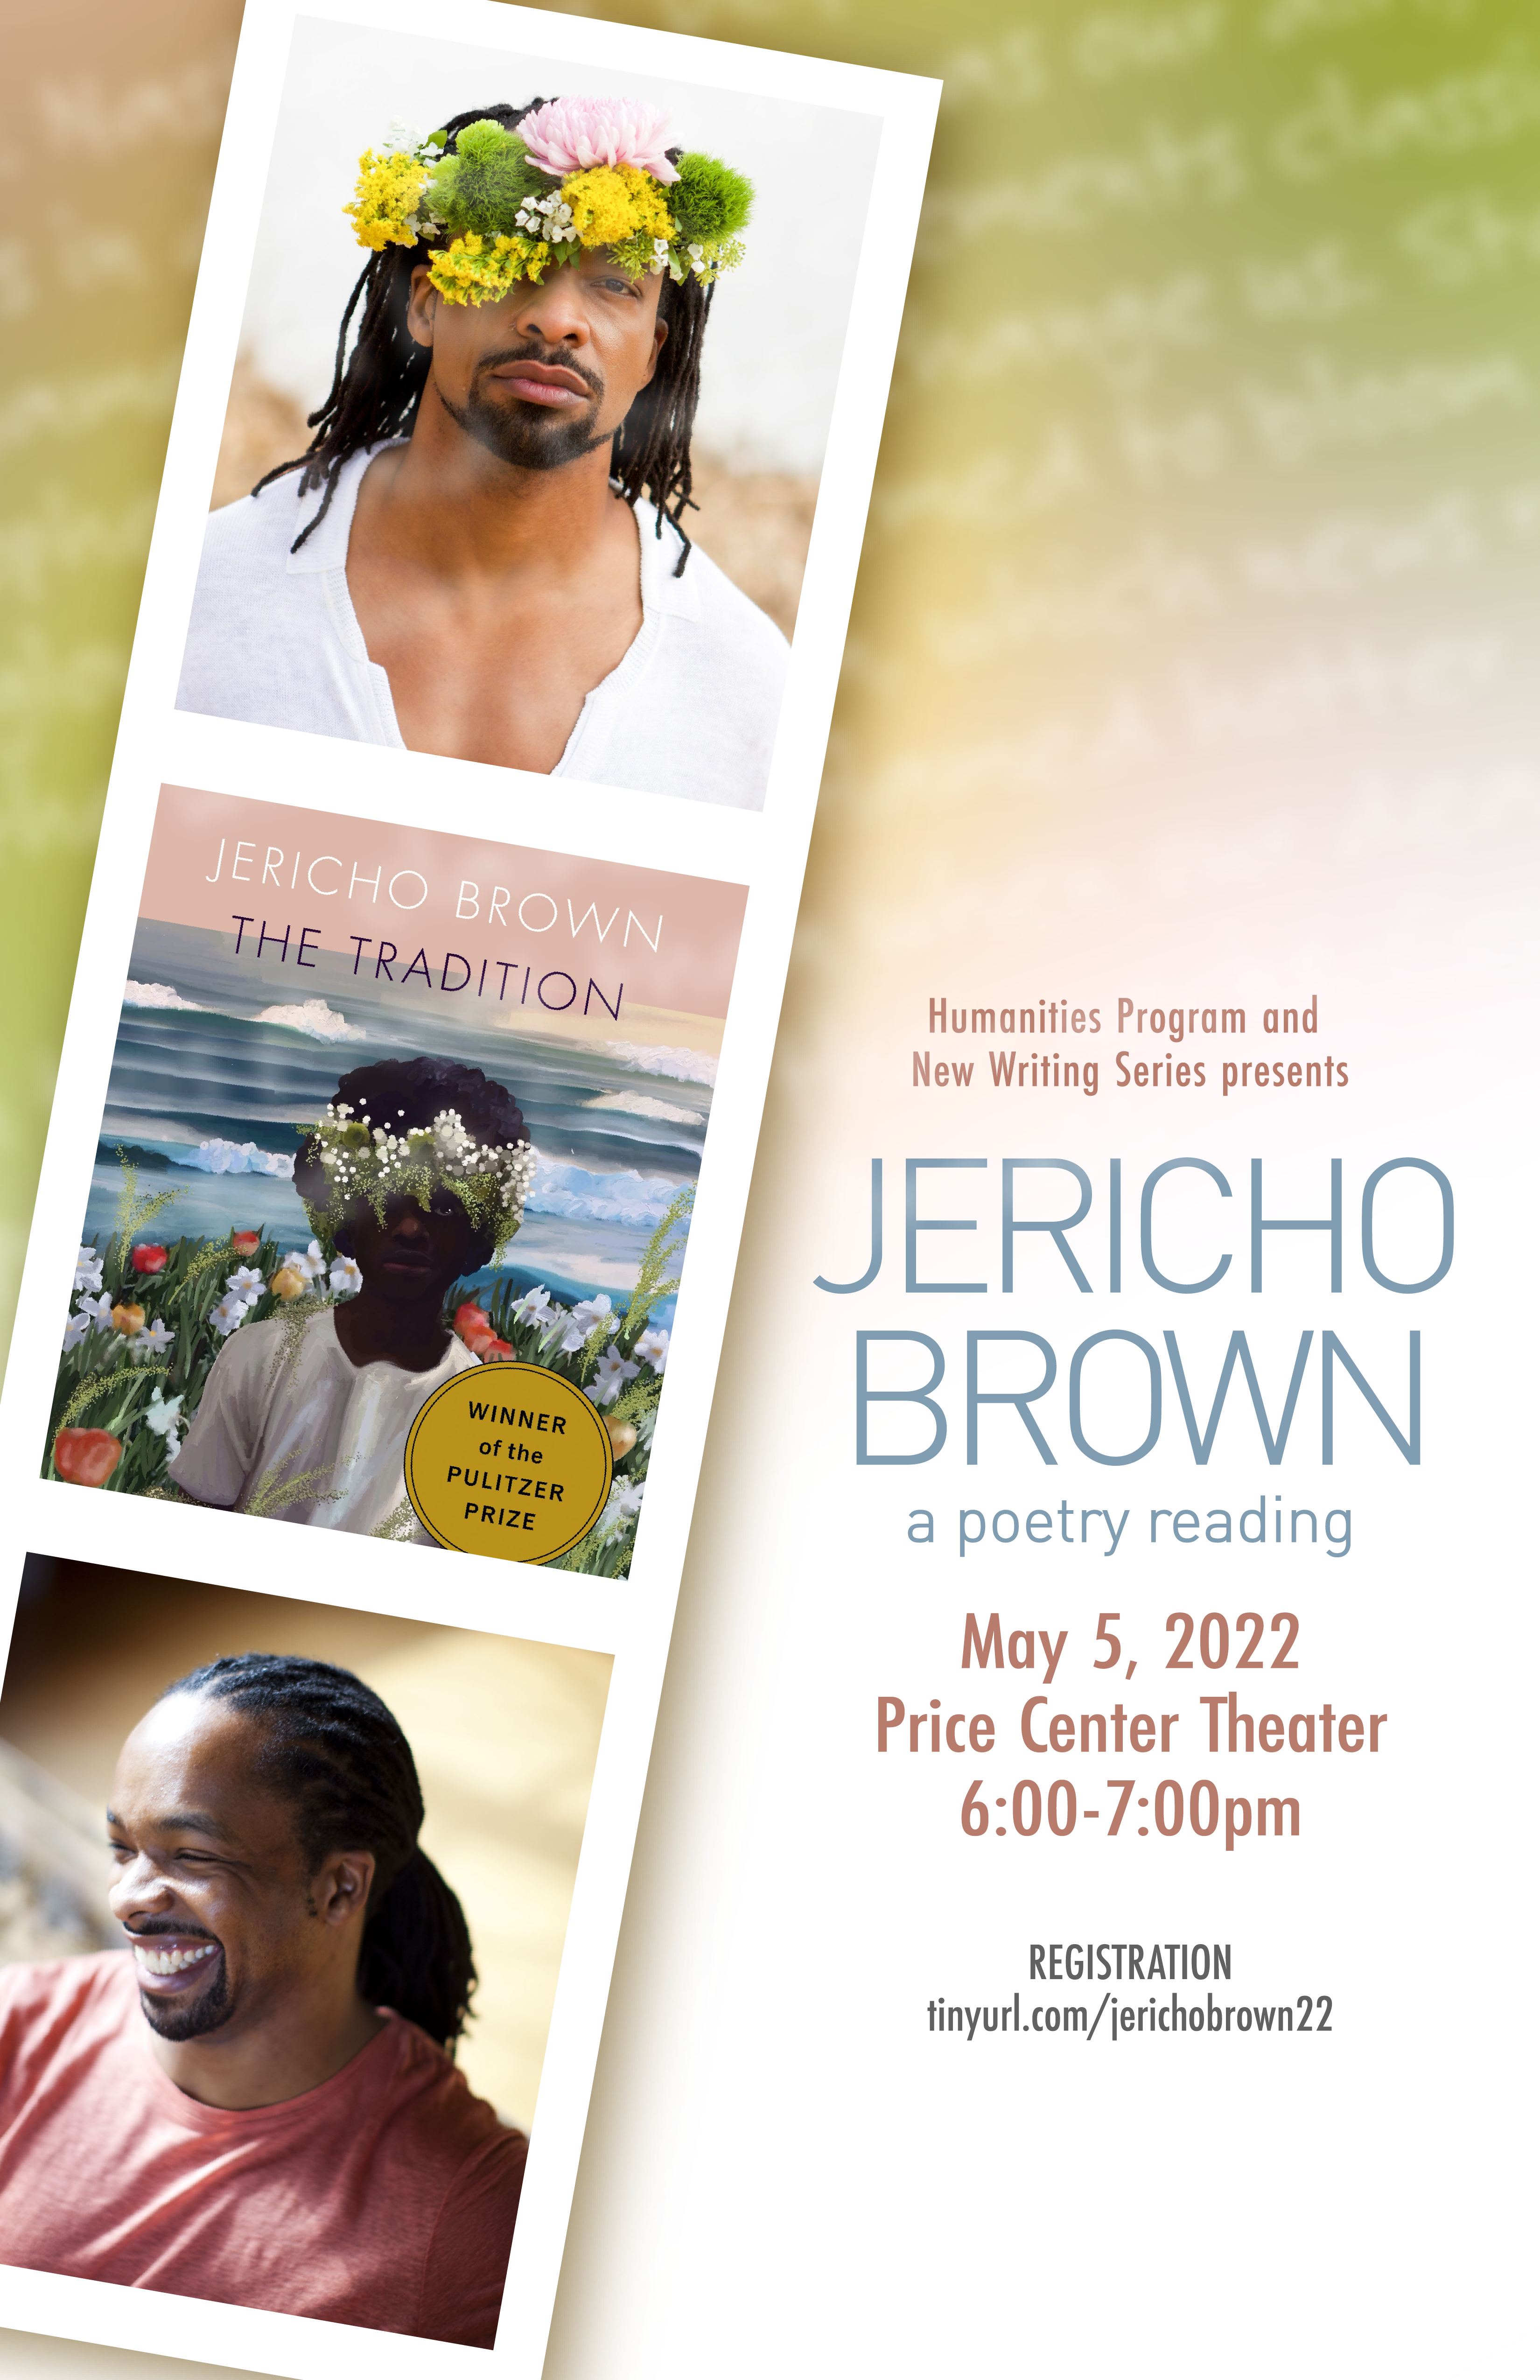 Jericho Brown poetry reading 2022